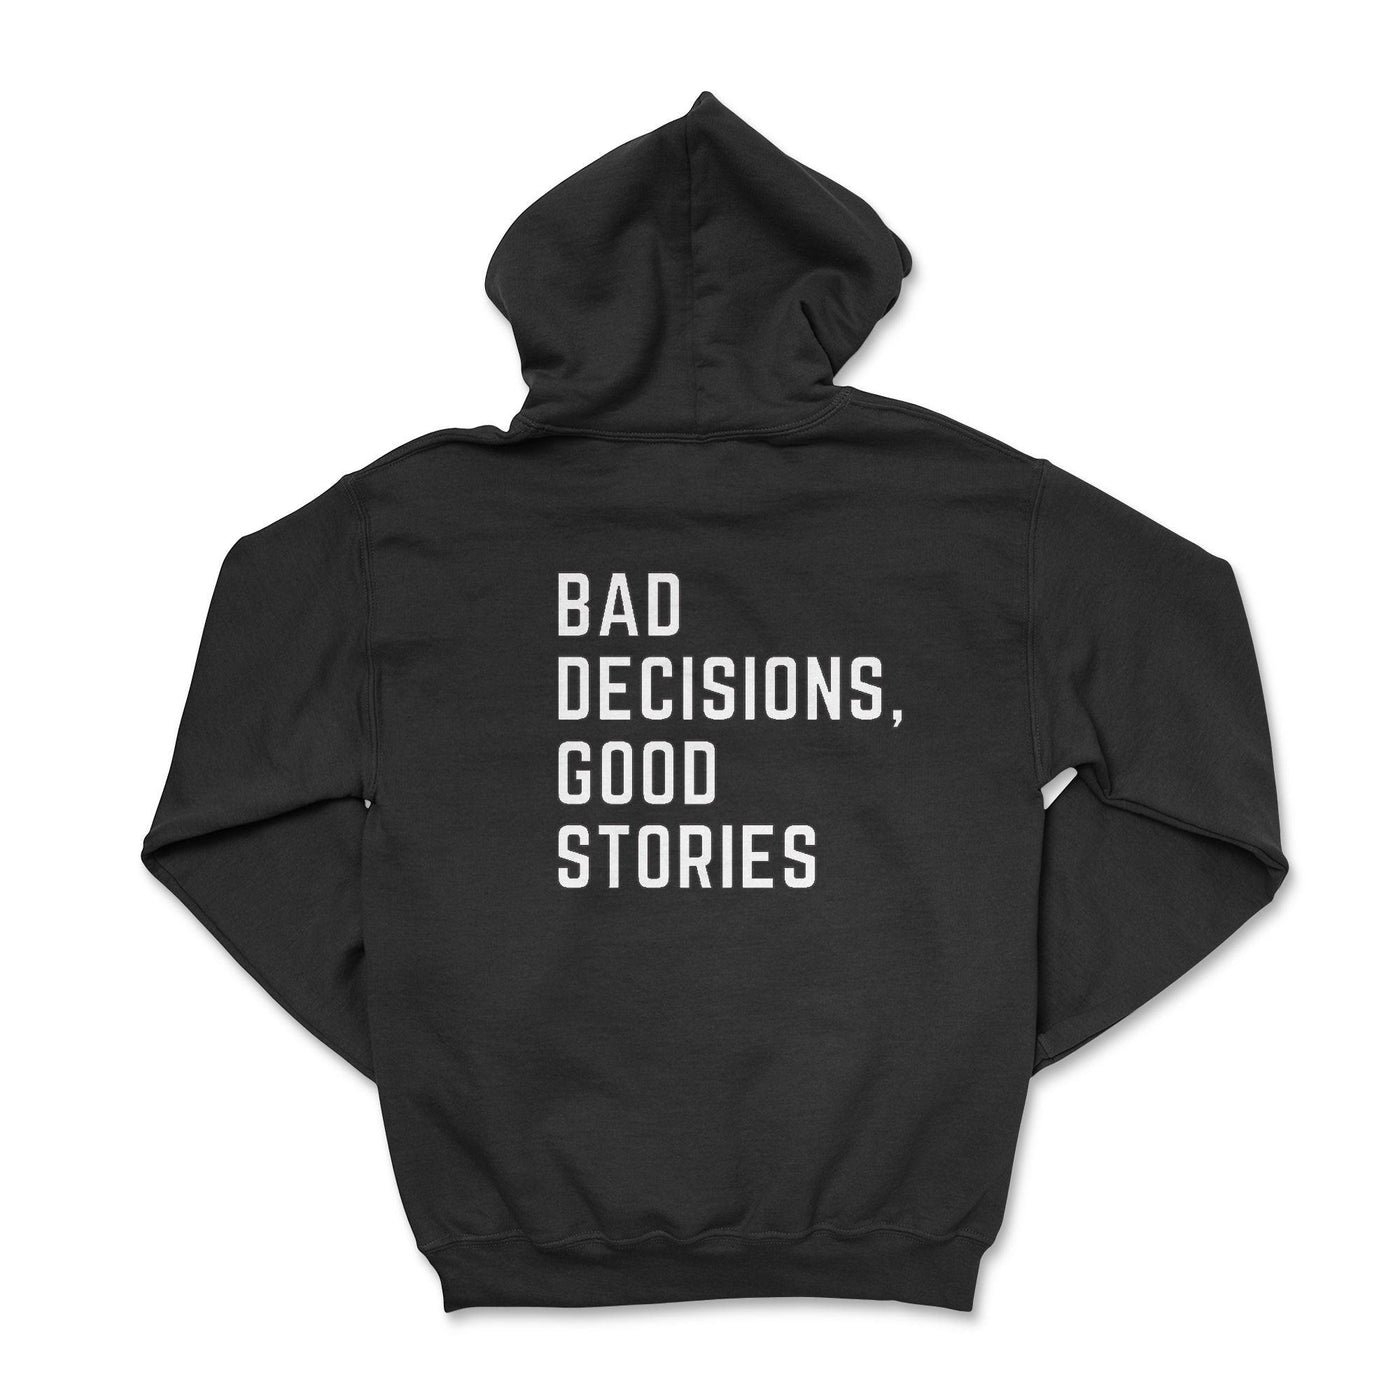 Bad Decisions, Good Stories Black Zip-Up Hoodie - Goats Trail